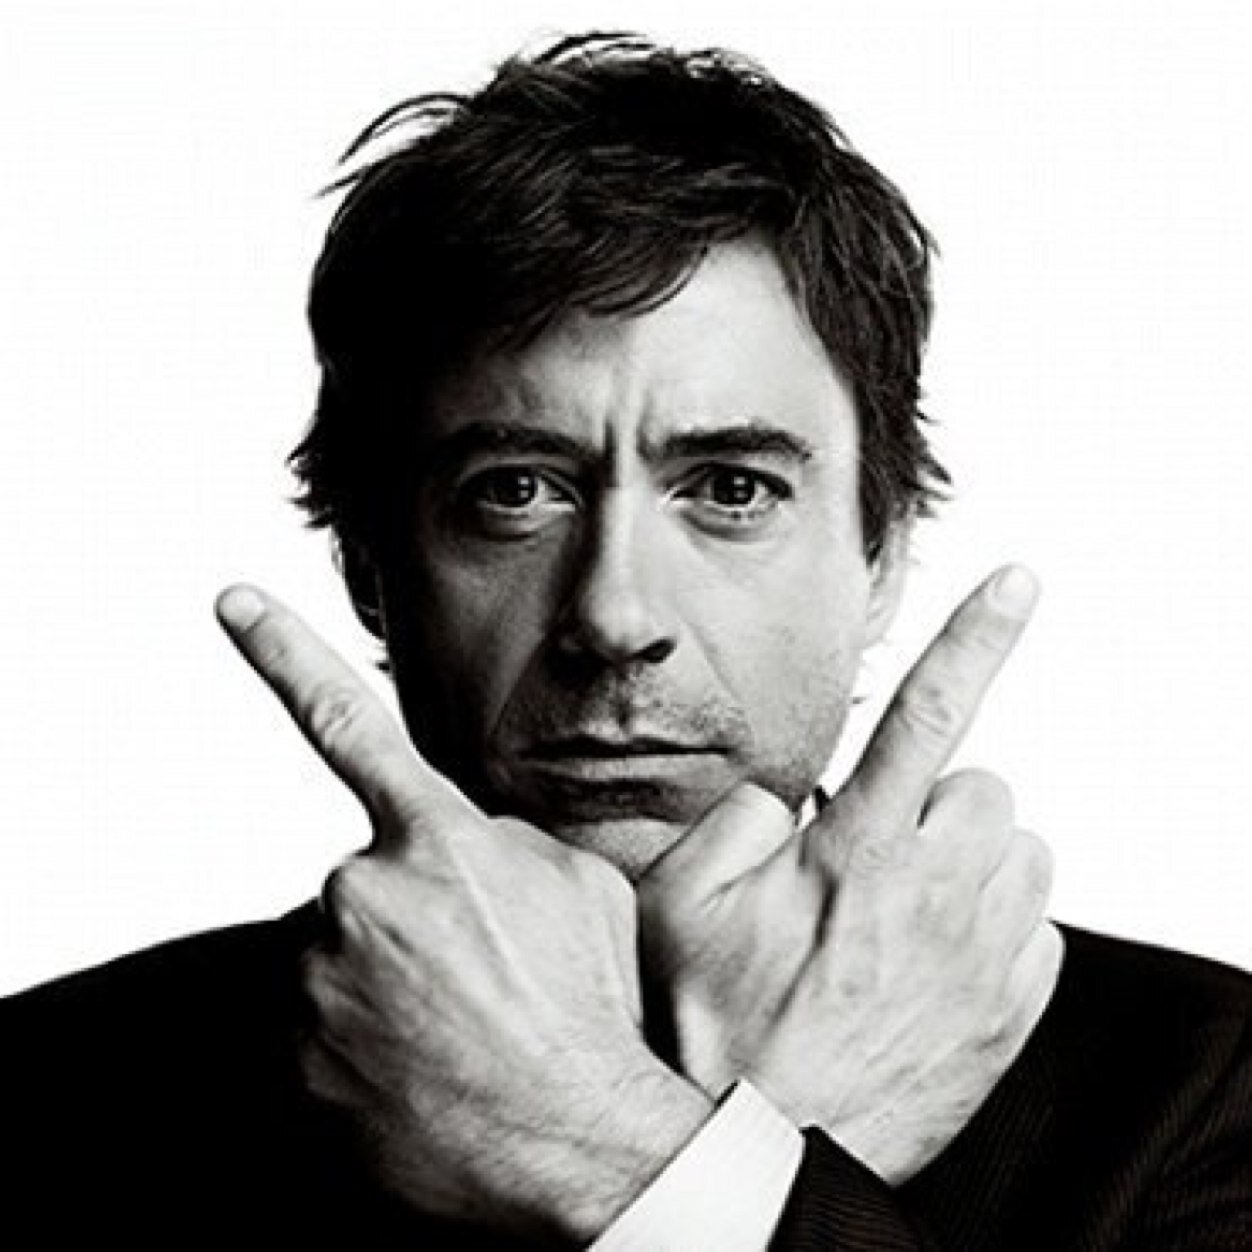 we're not fans but we're ducklings.we're not friends but we're family. Robert John Downey Ford Jr ♥